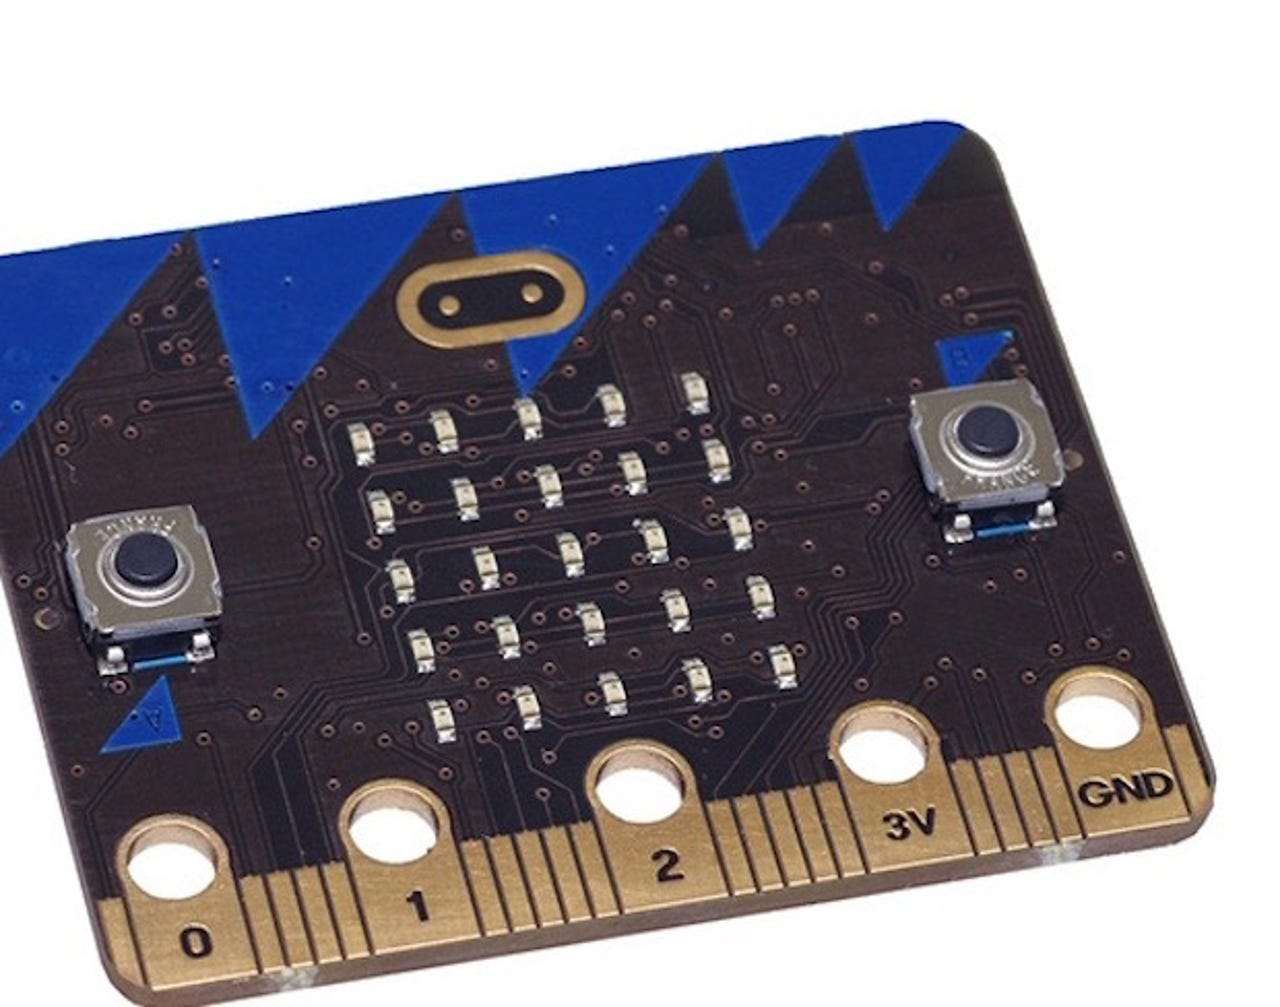 Anyone can now buy a BBC micro:bit